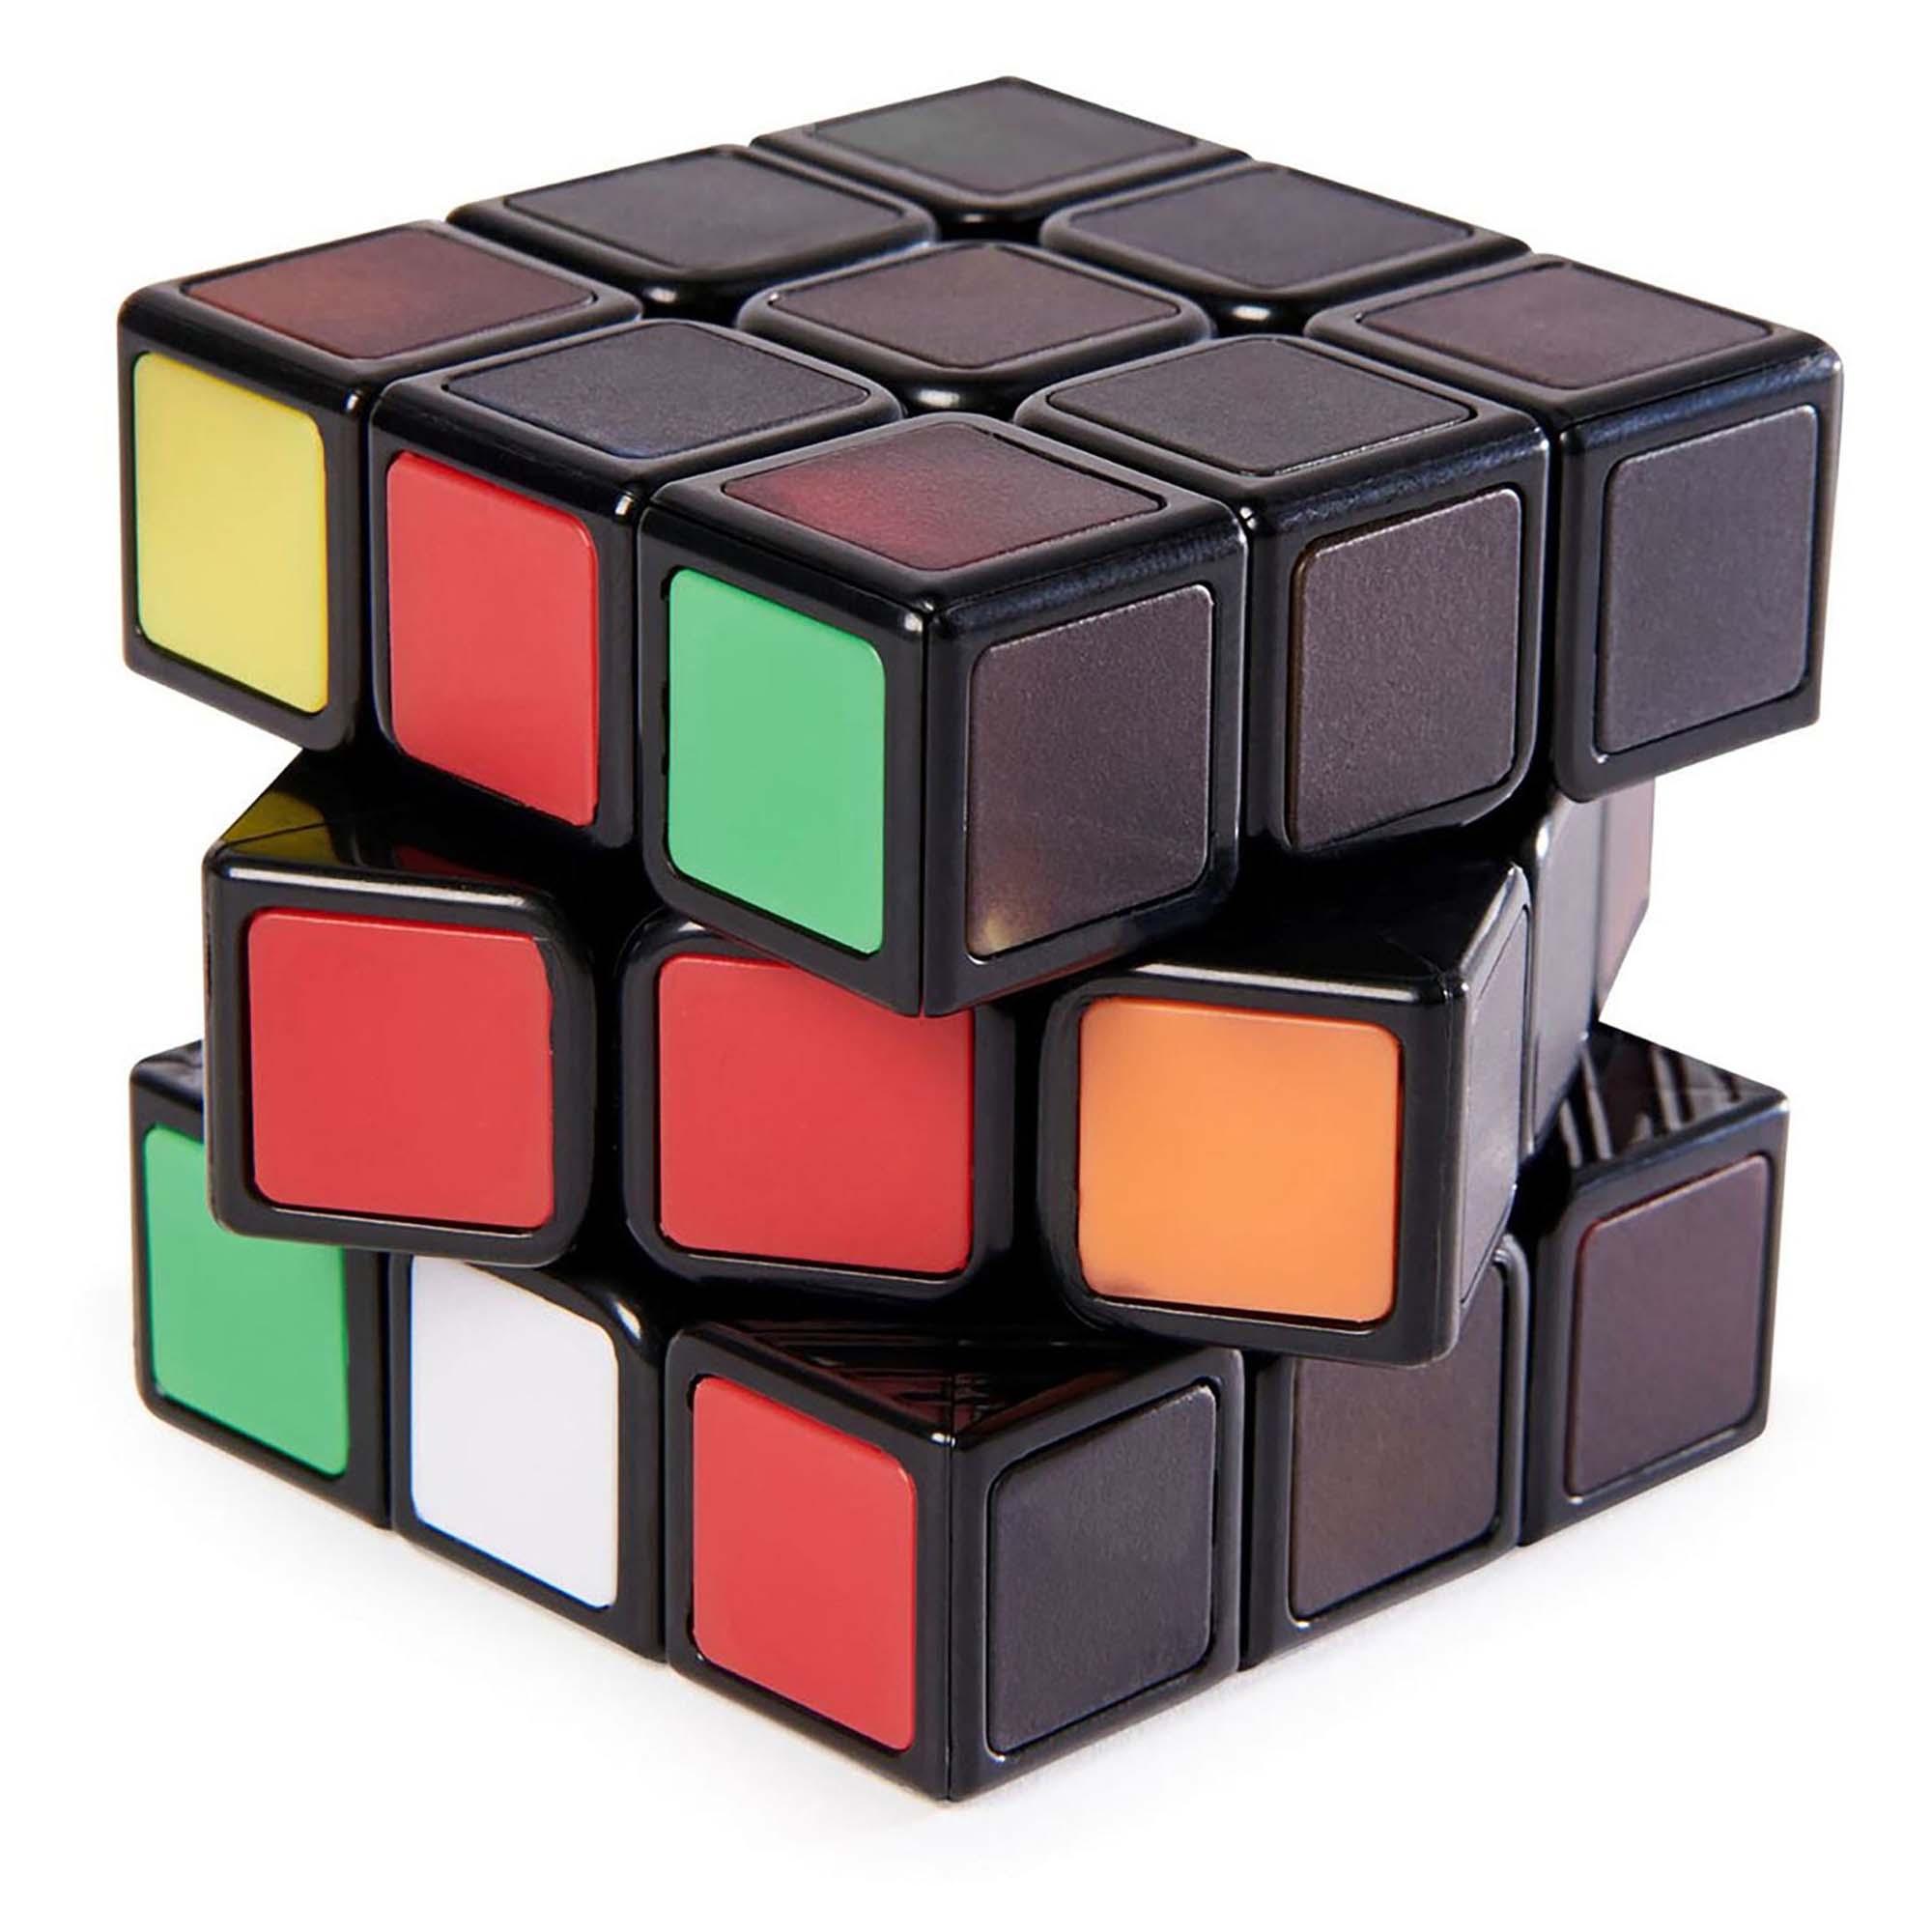 Rubik's Professor, 5x5 Cube Color-Matching Puzzle Highly Complex  Challenging Problem-Solving Brain Teaser Fidget Toy, for Adults & Kids Ages  8 and up